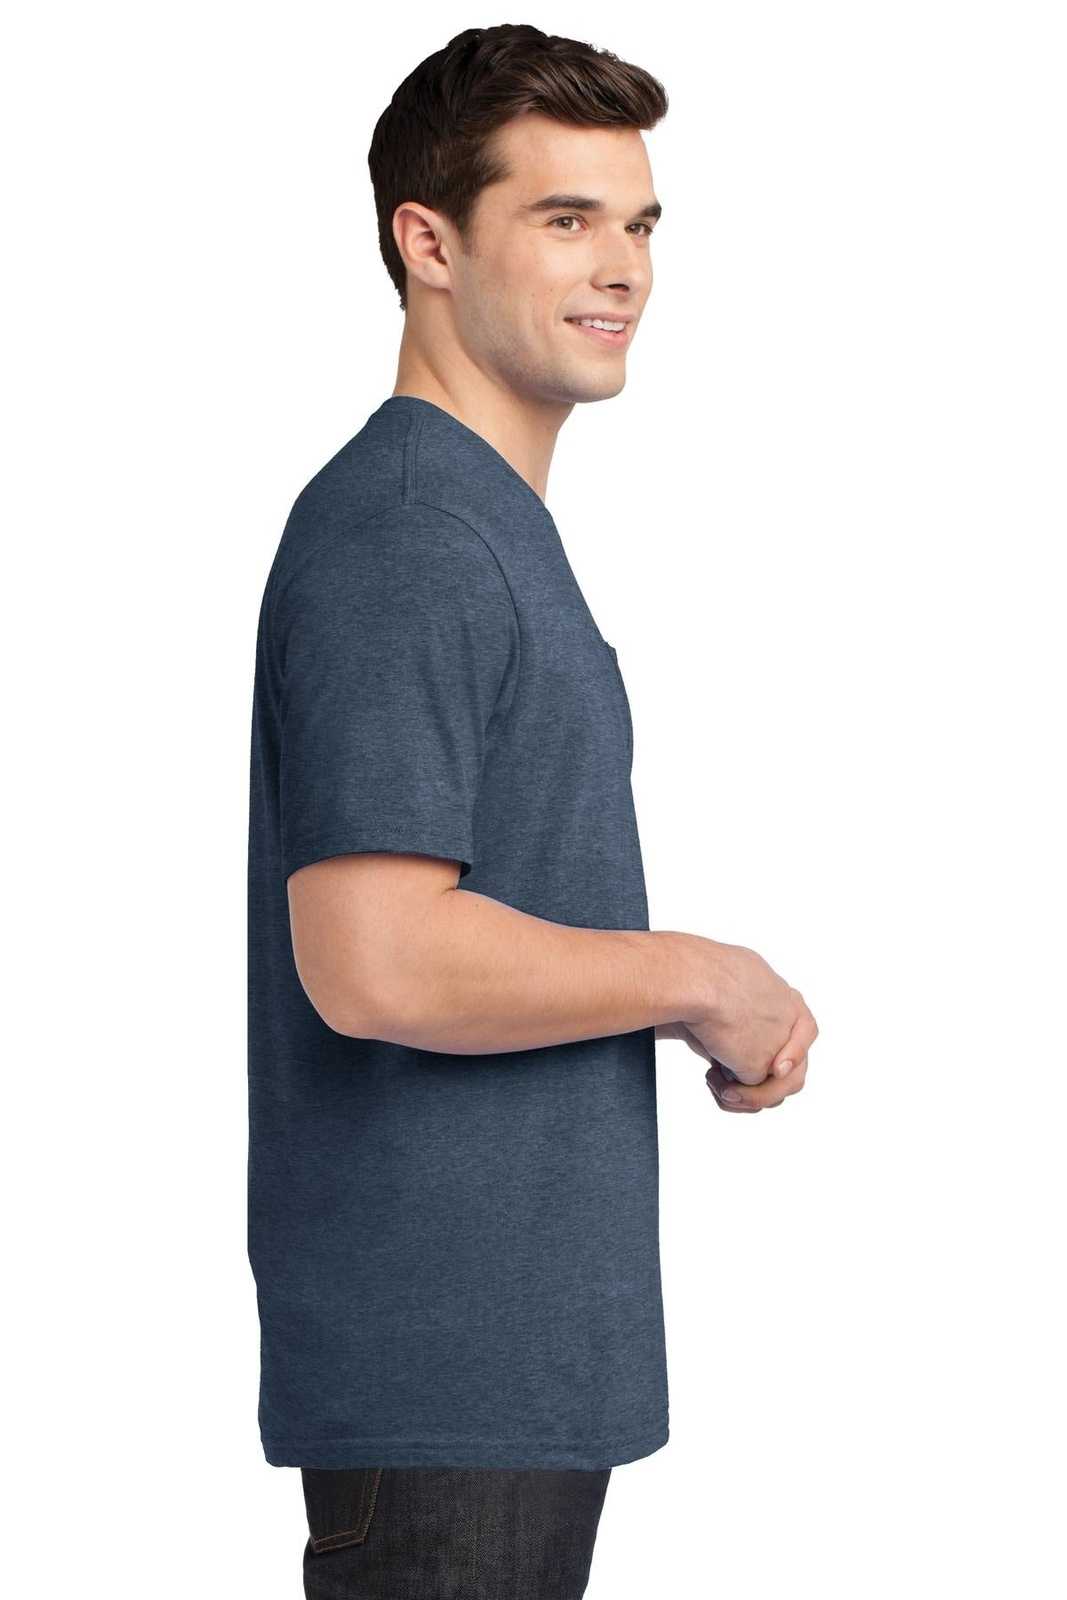 District DT6000P Very Important Tee with Pocket - Heathered Navy - HIT a Double - 3